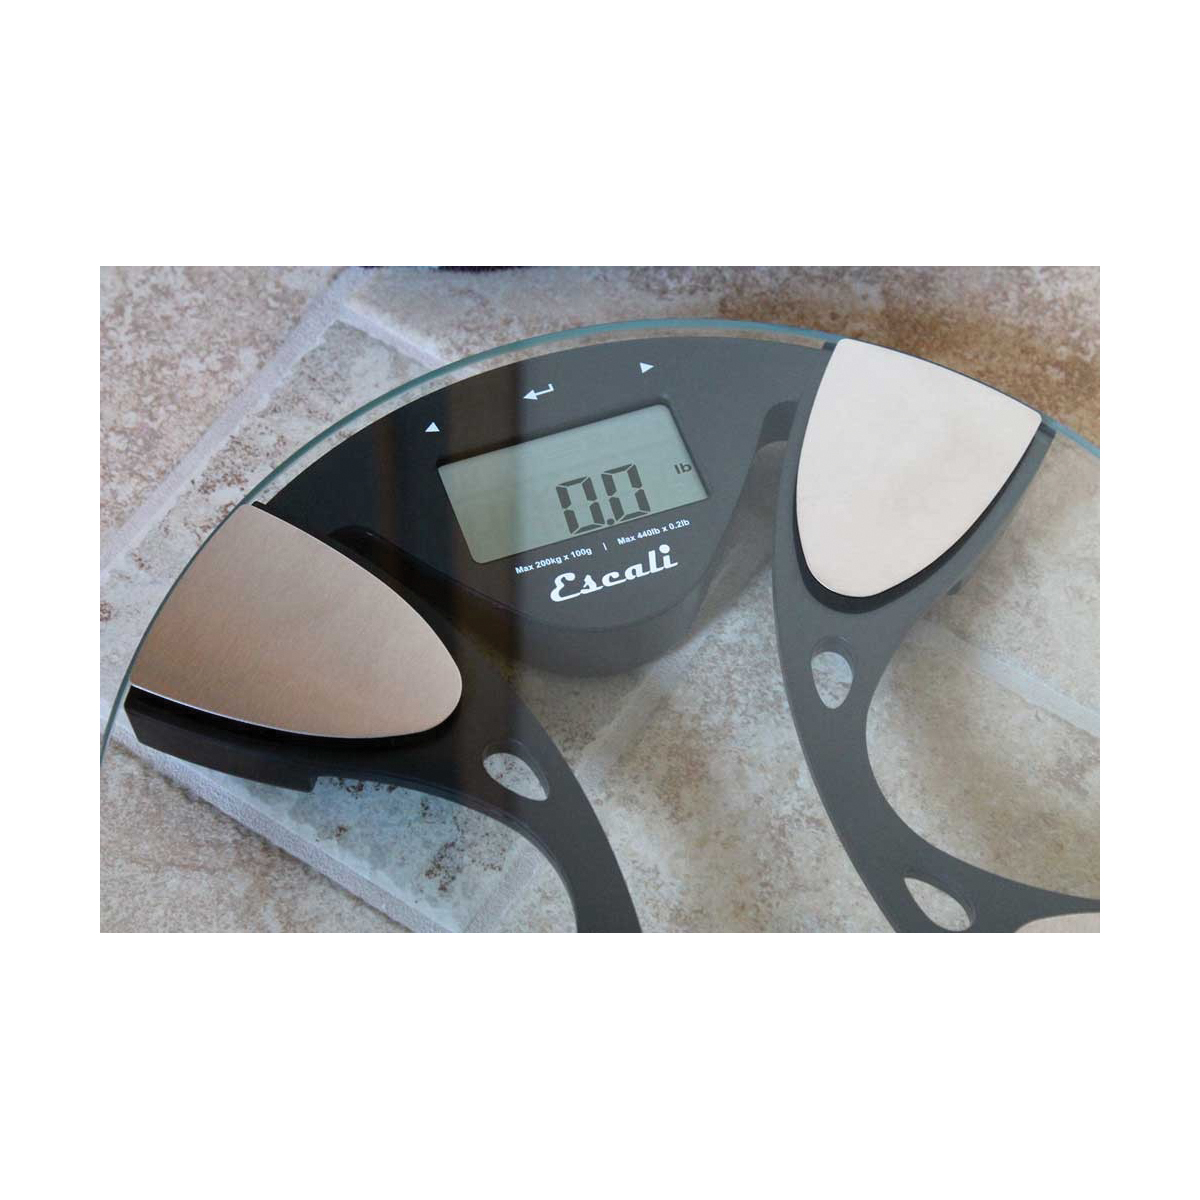 Escali BFBW180 Ultra Slim Body Composition Scale, 400 lb Capacity, LCD Display, Clear, 14 in OAW, 1 in OAH - 3